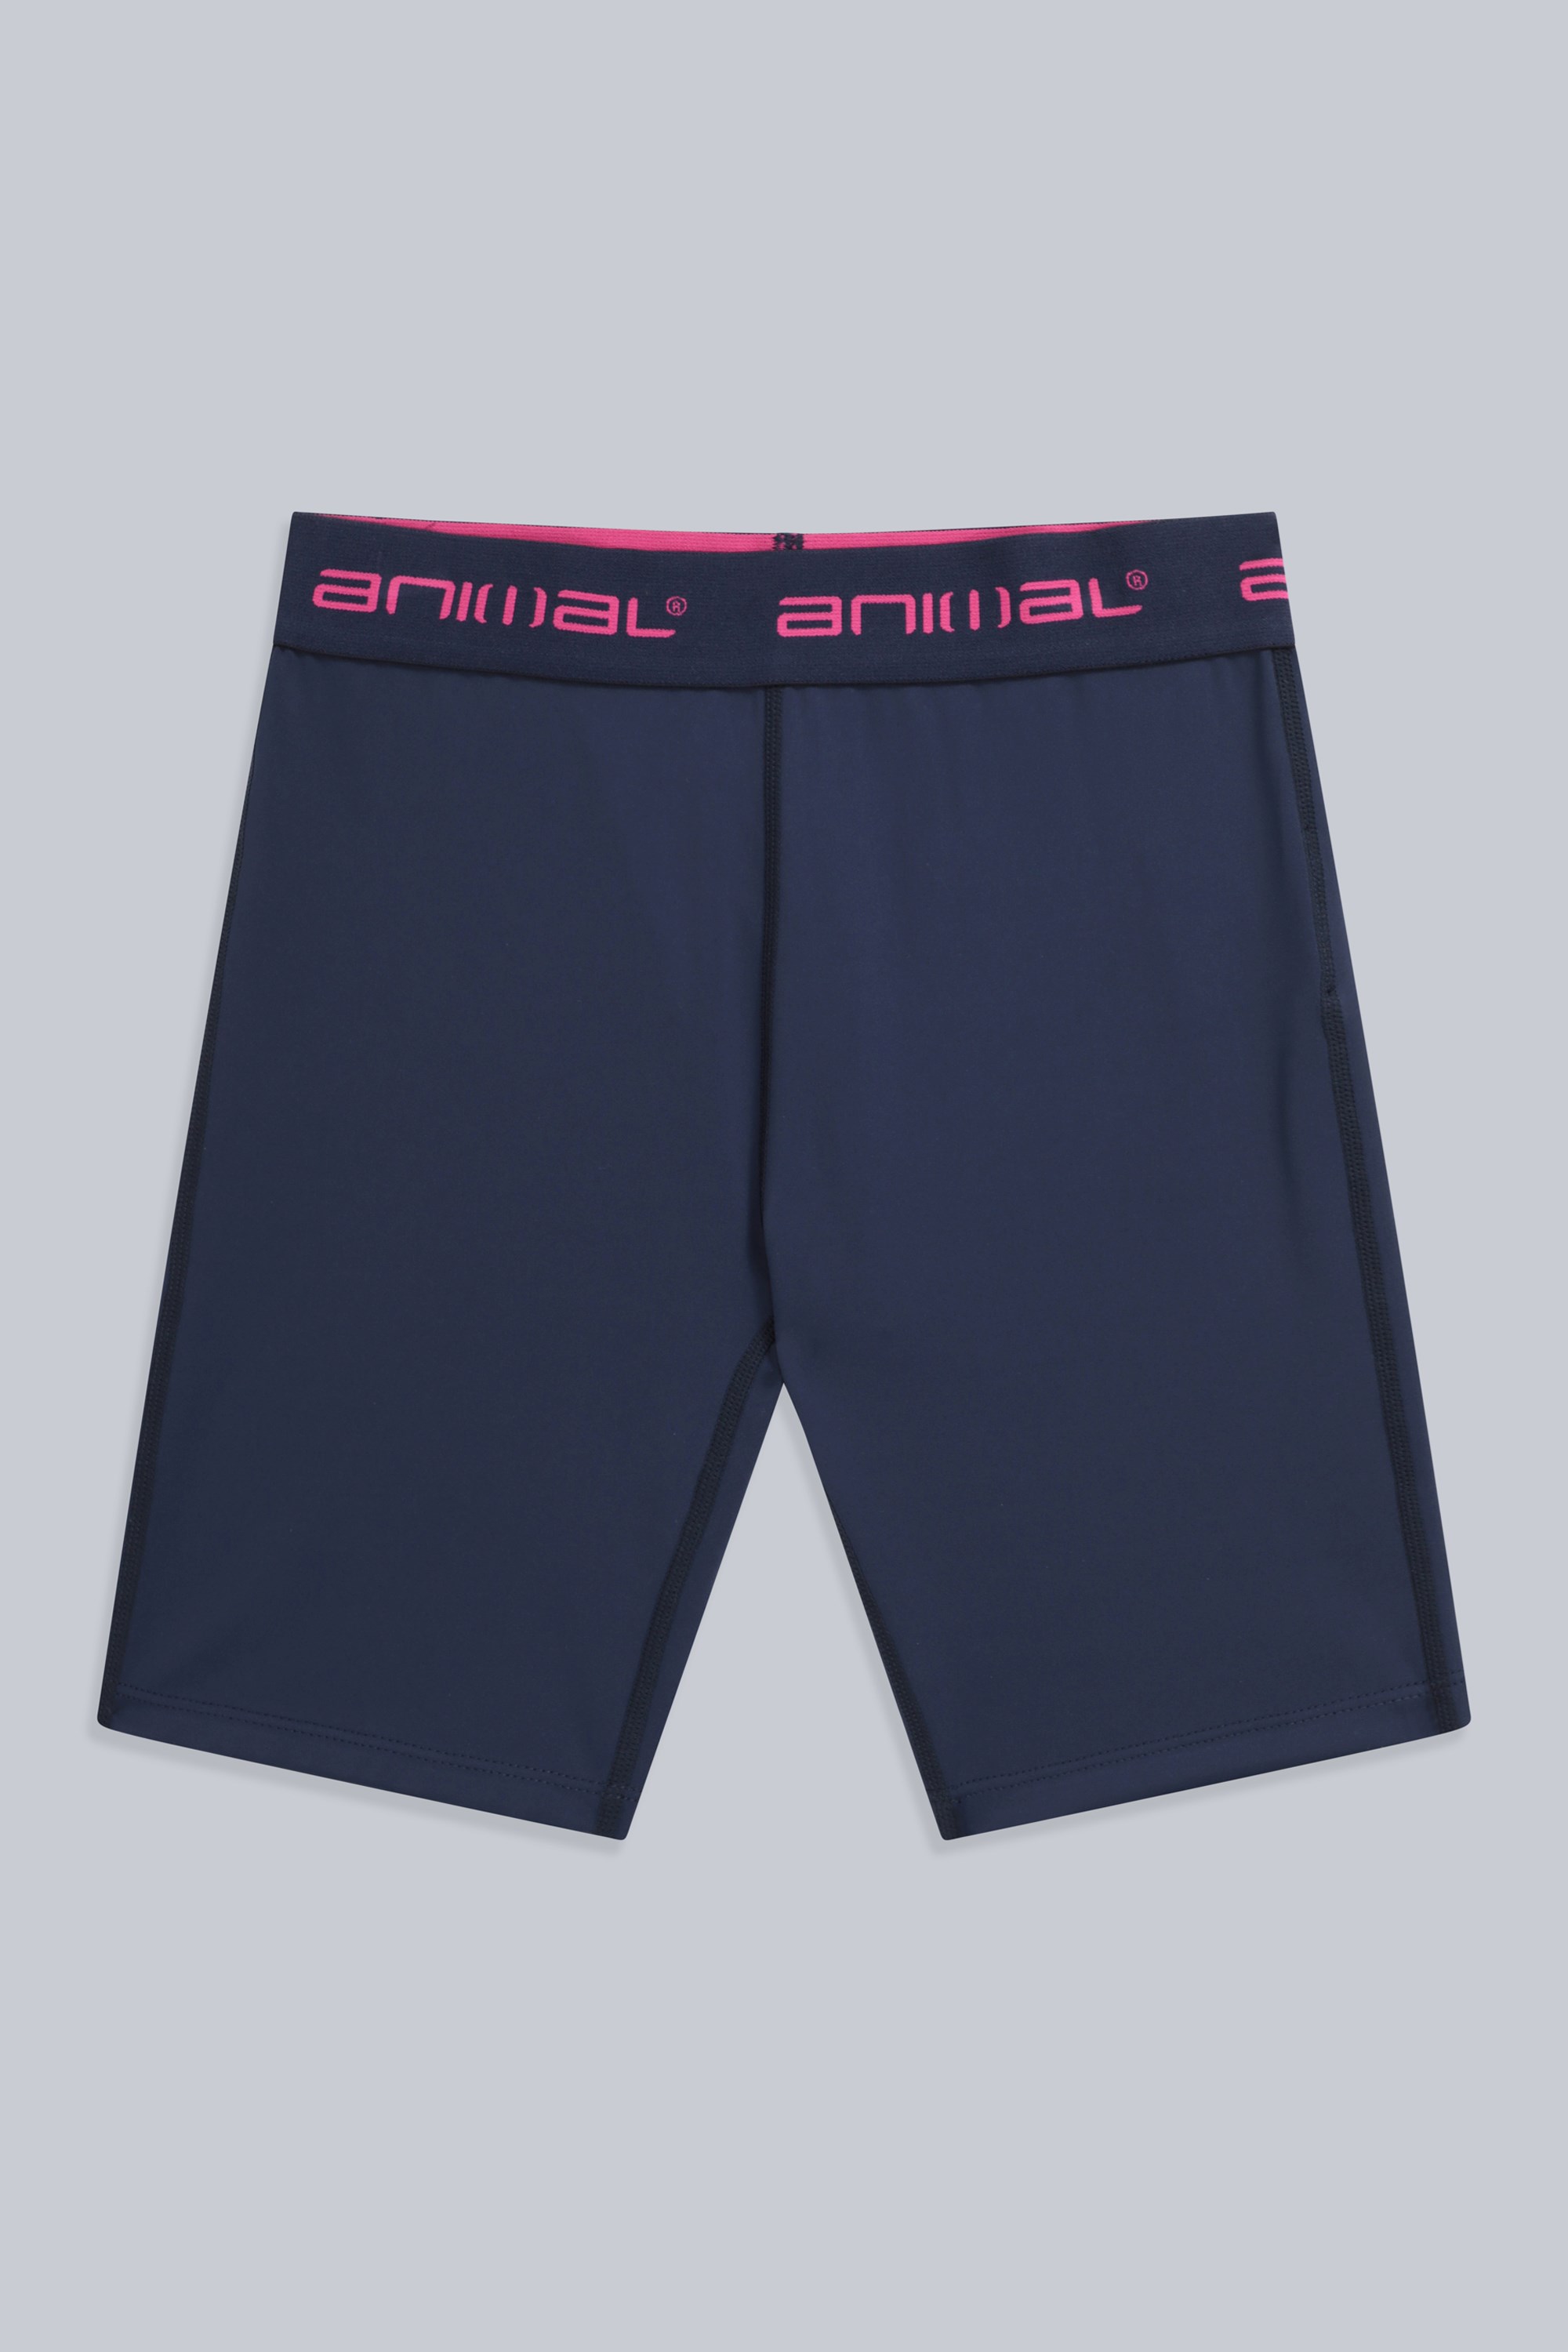 Roadtrip Kids Recycled Cycling Shorts - Navy